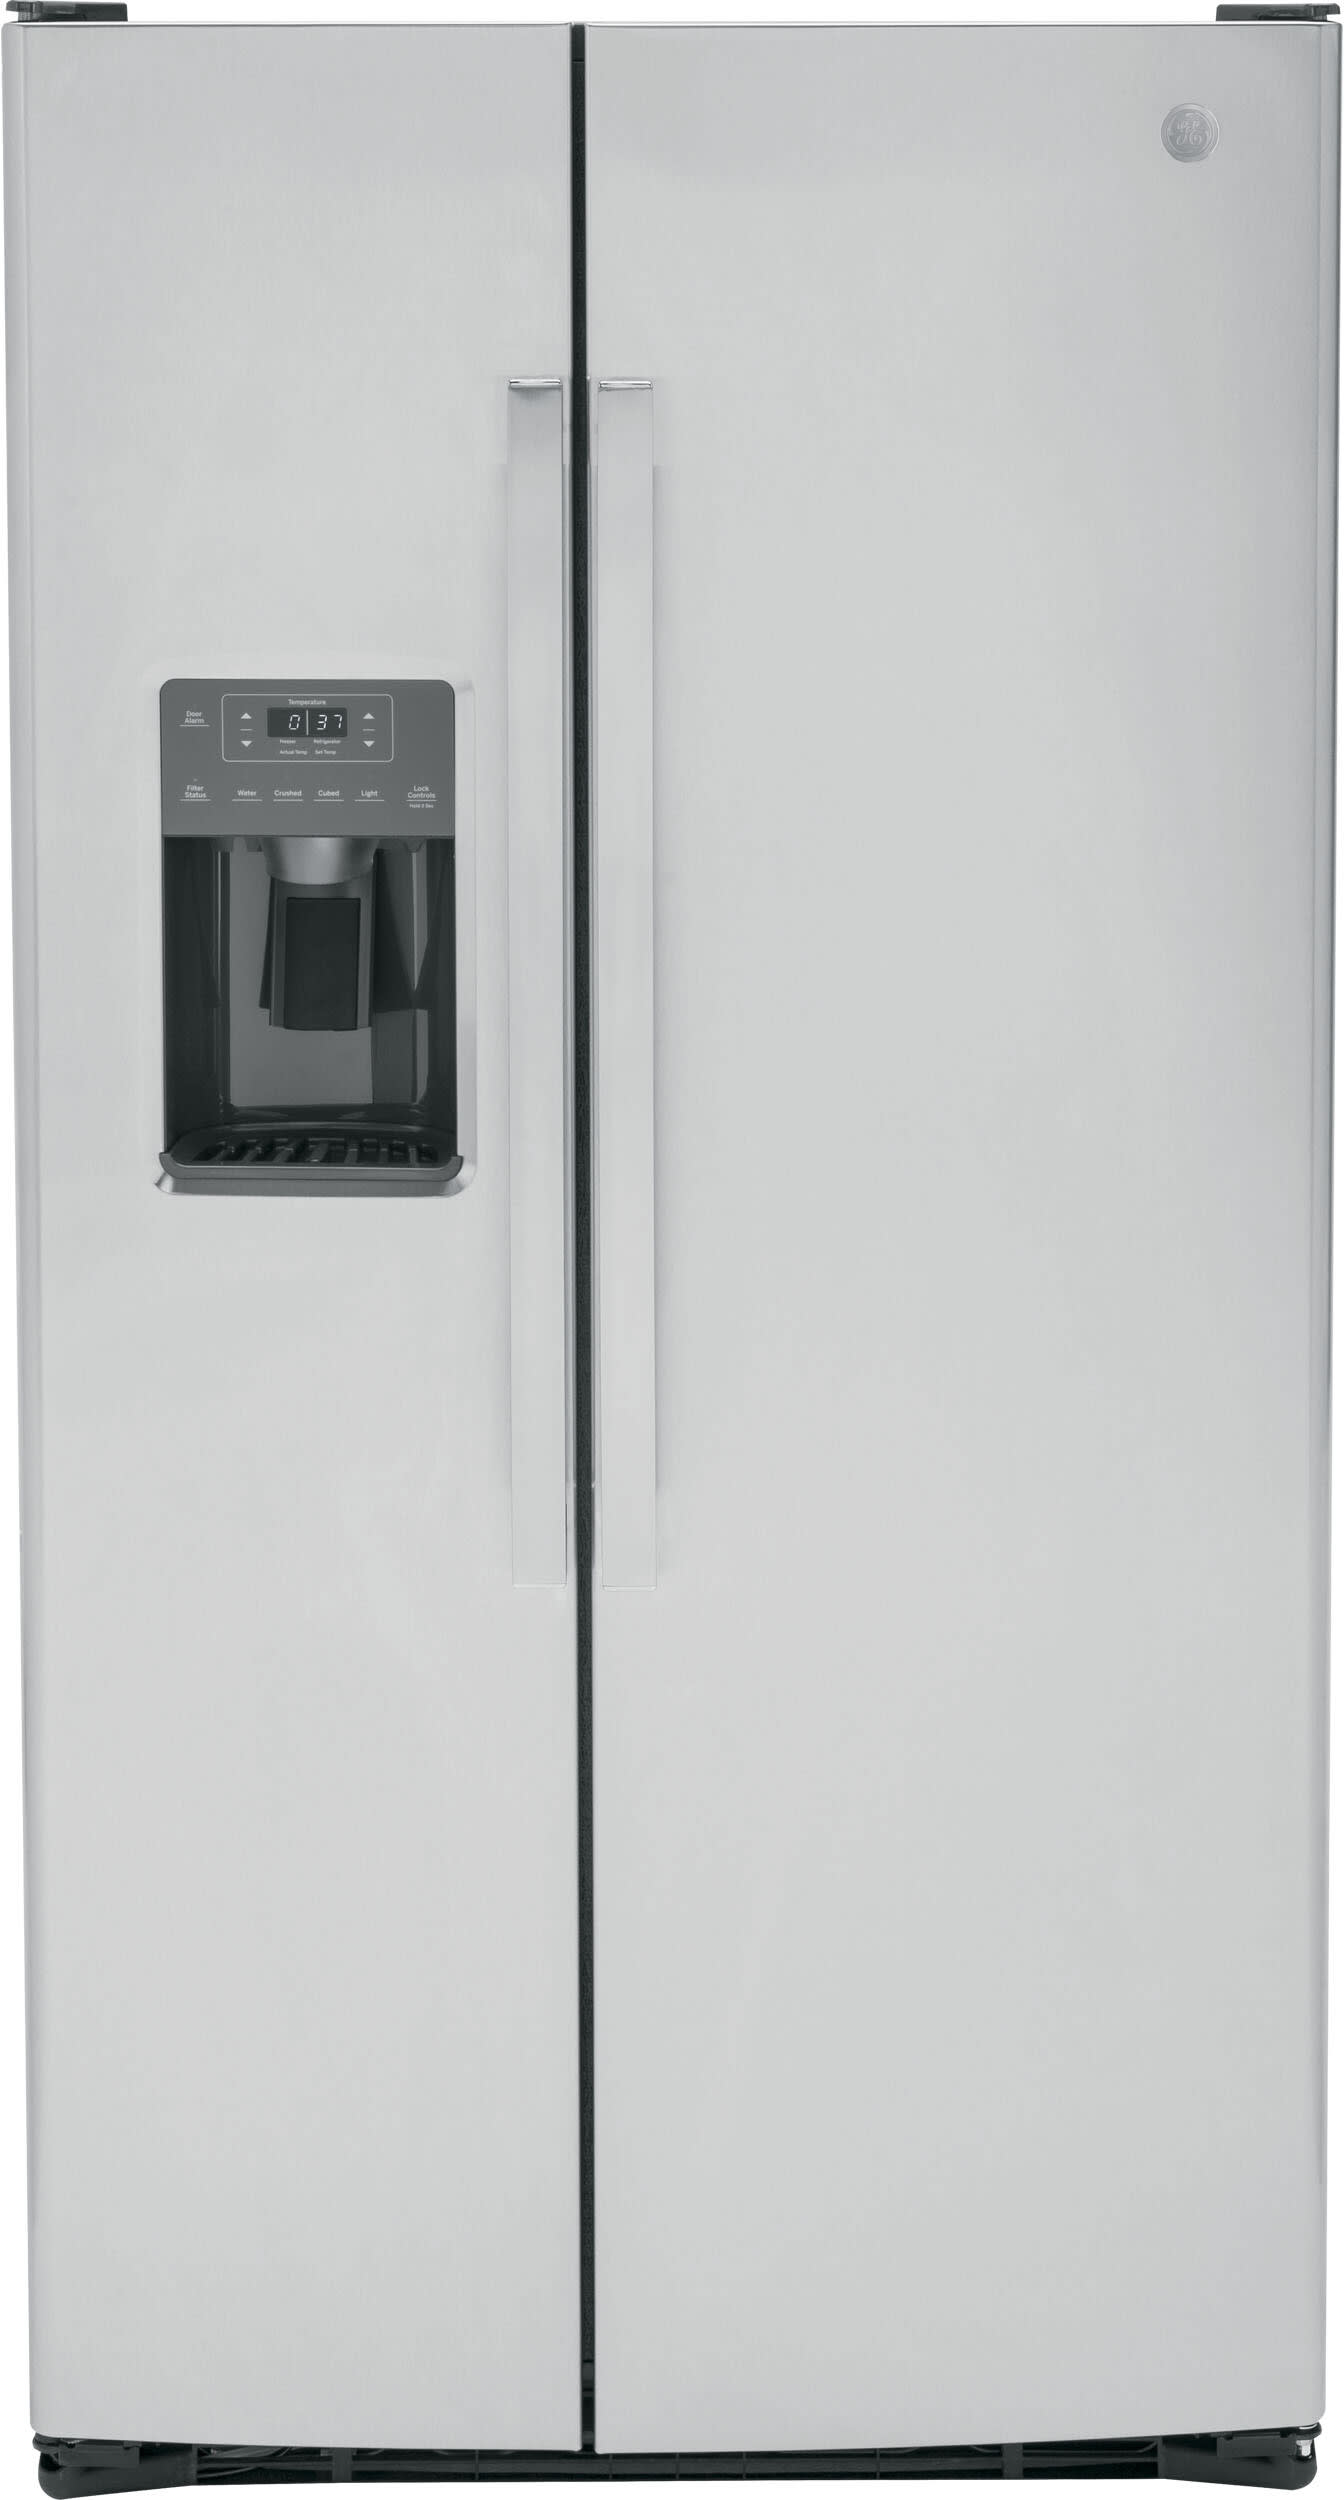 GE GDT670SMVES 24 Inch Fully Integrated Dishwasher with 16 Place